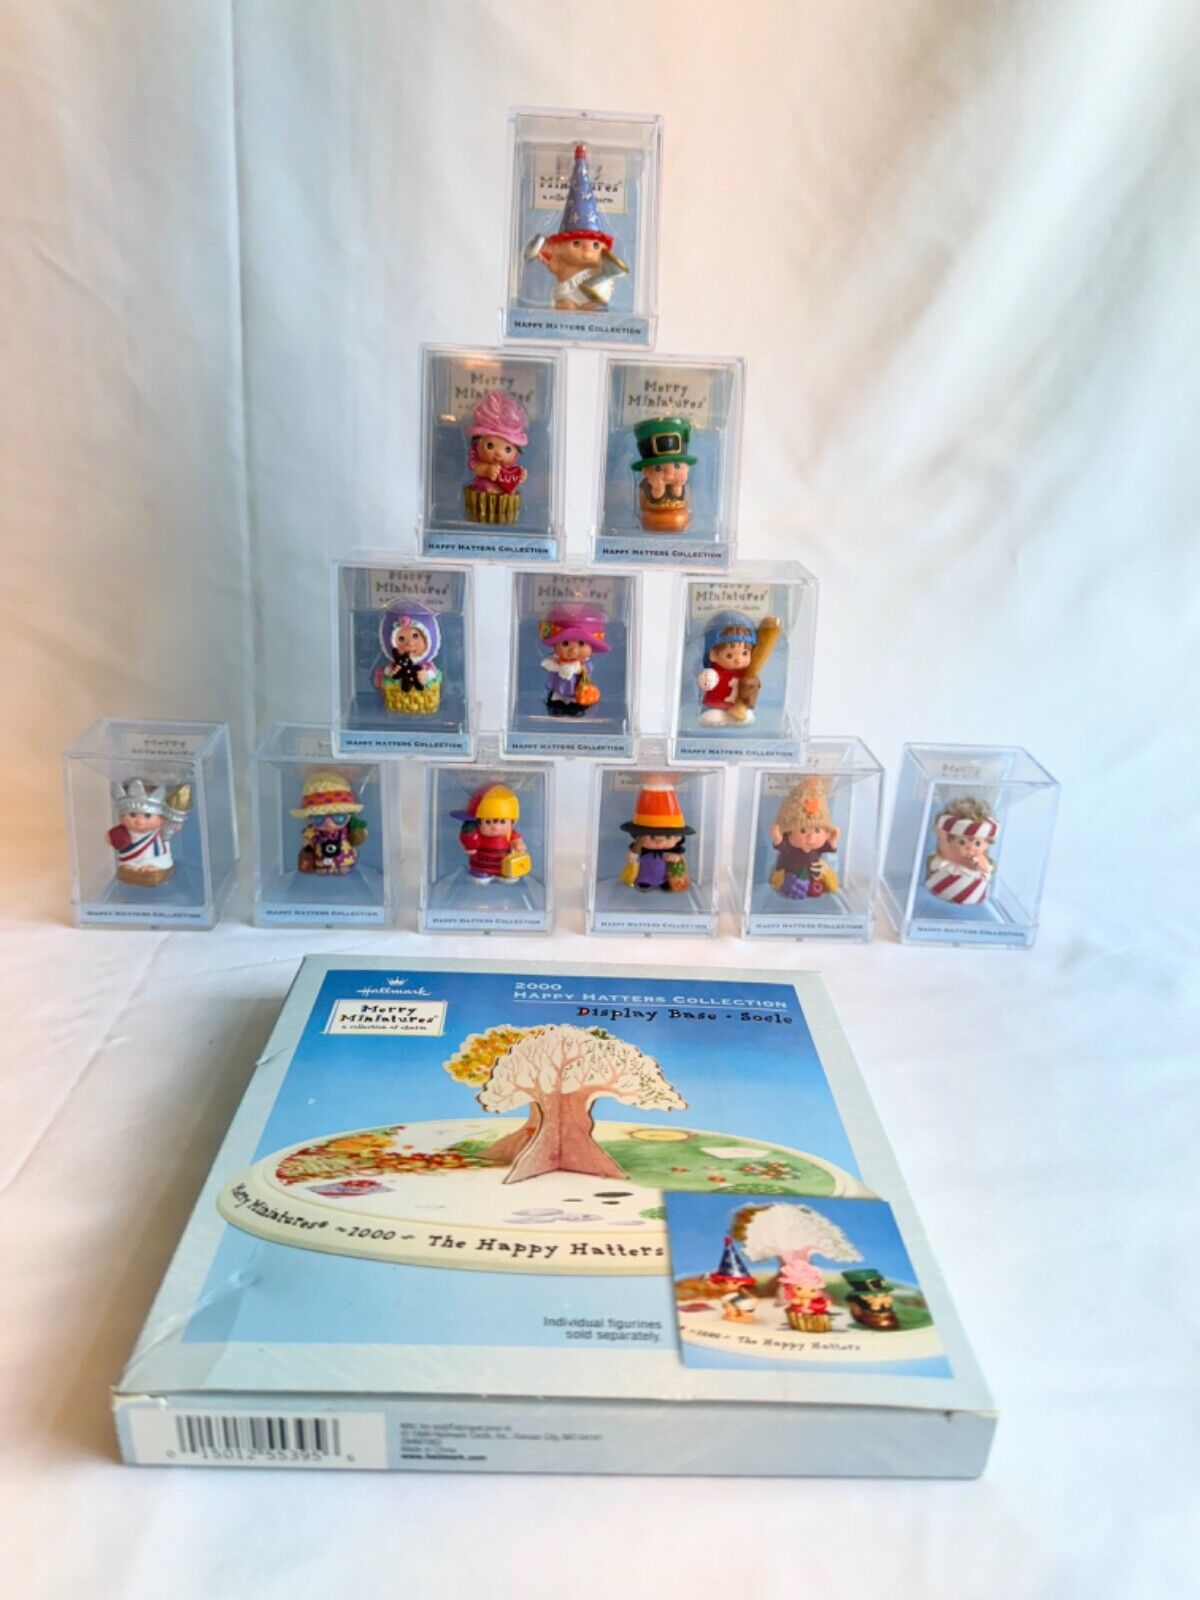 Hallmark Merry Minatures 2000 HAPPY HATTERS lot set of 12 with display base